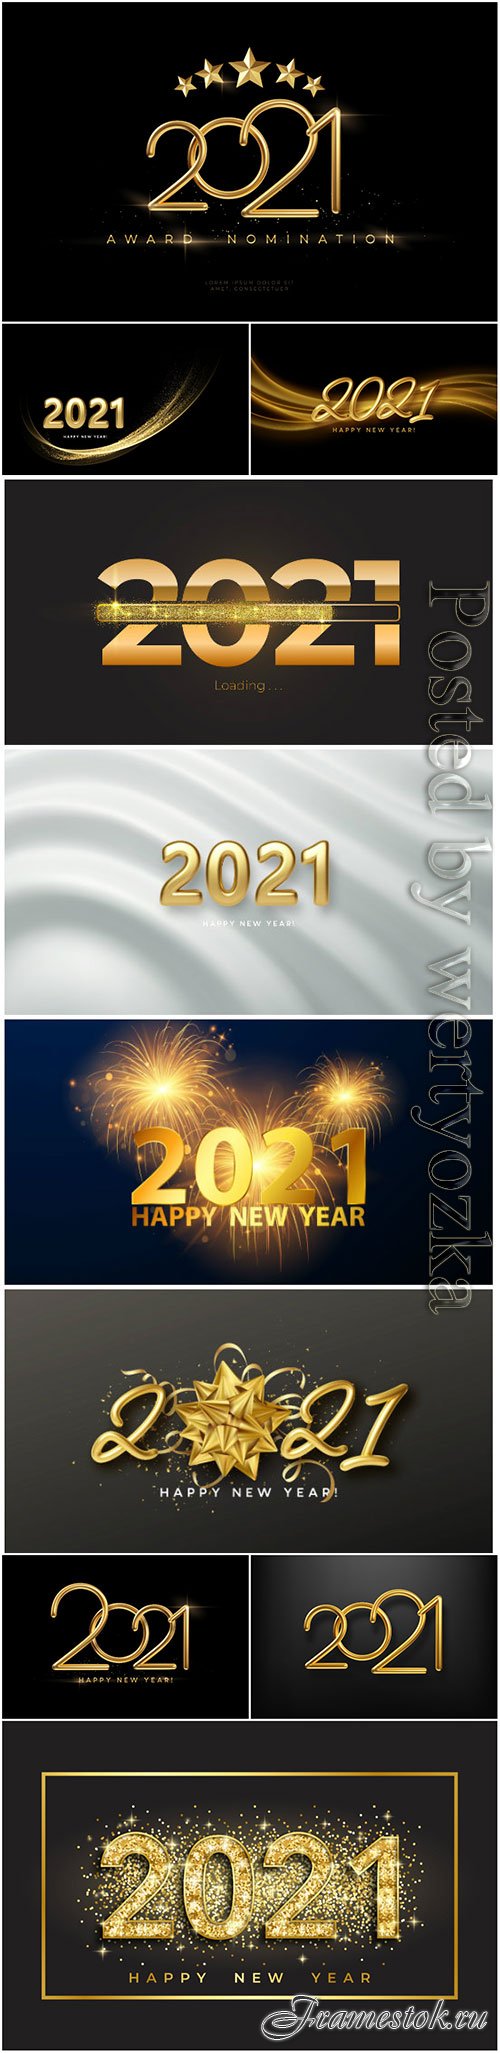 New Year 2021 realistic golden 3d inscription on the background